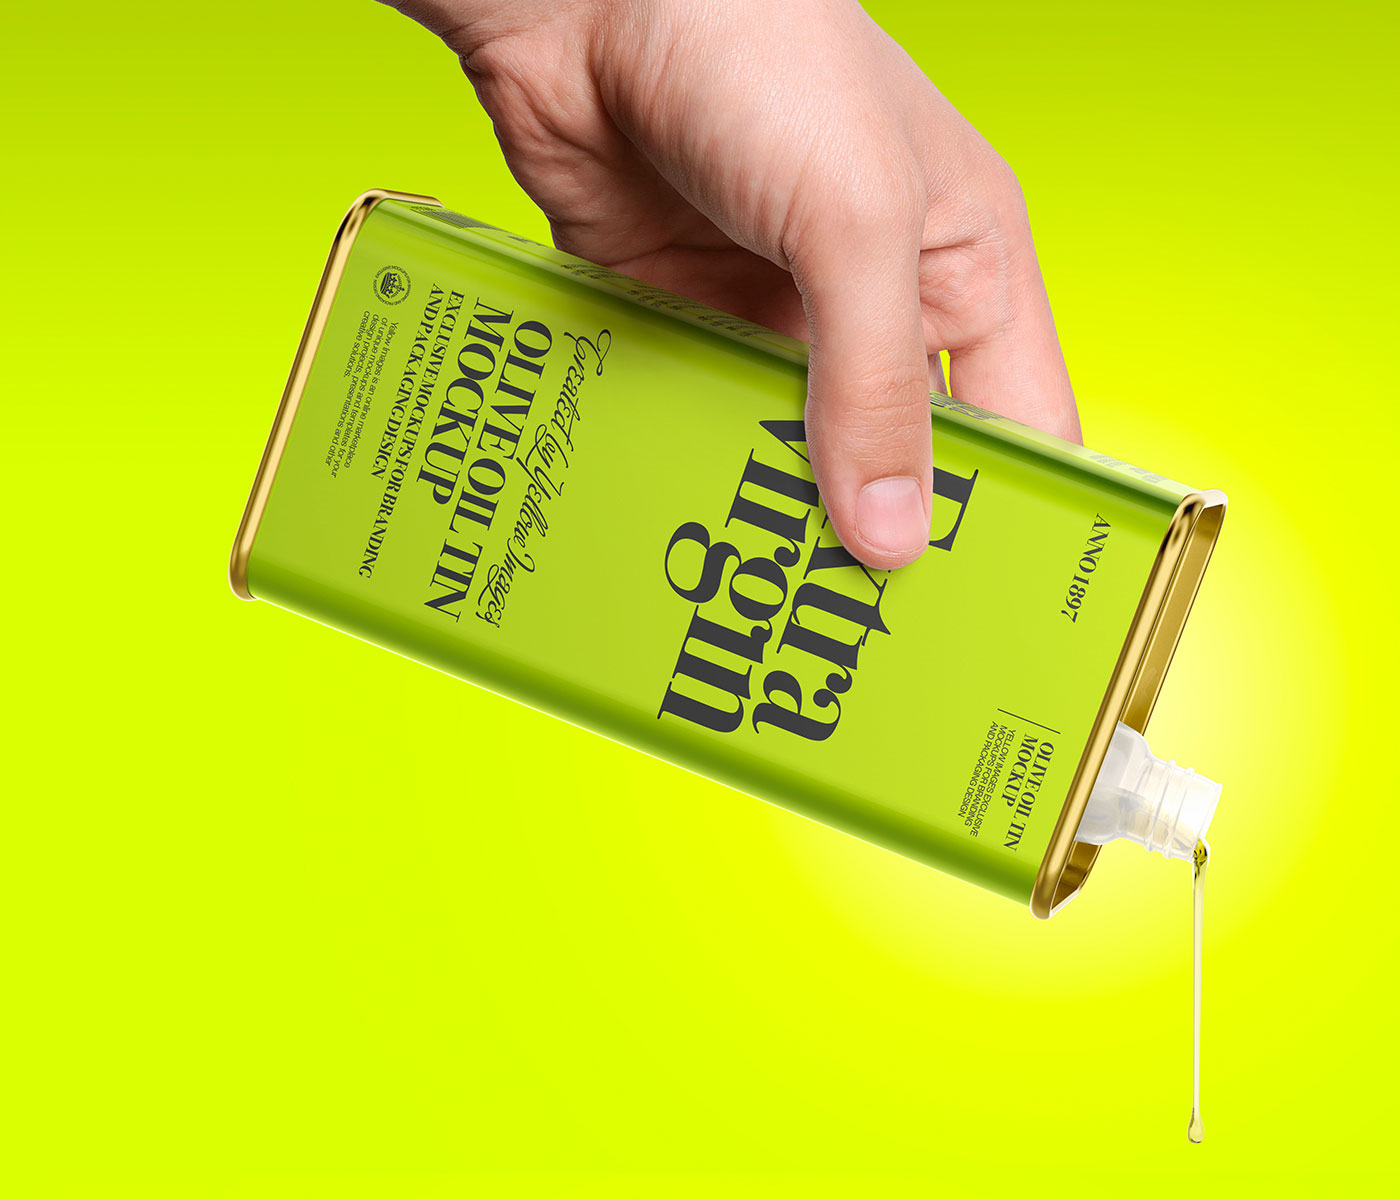 Free-Olive-Oil-Tin-Can-Mockup-PSD